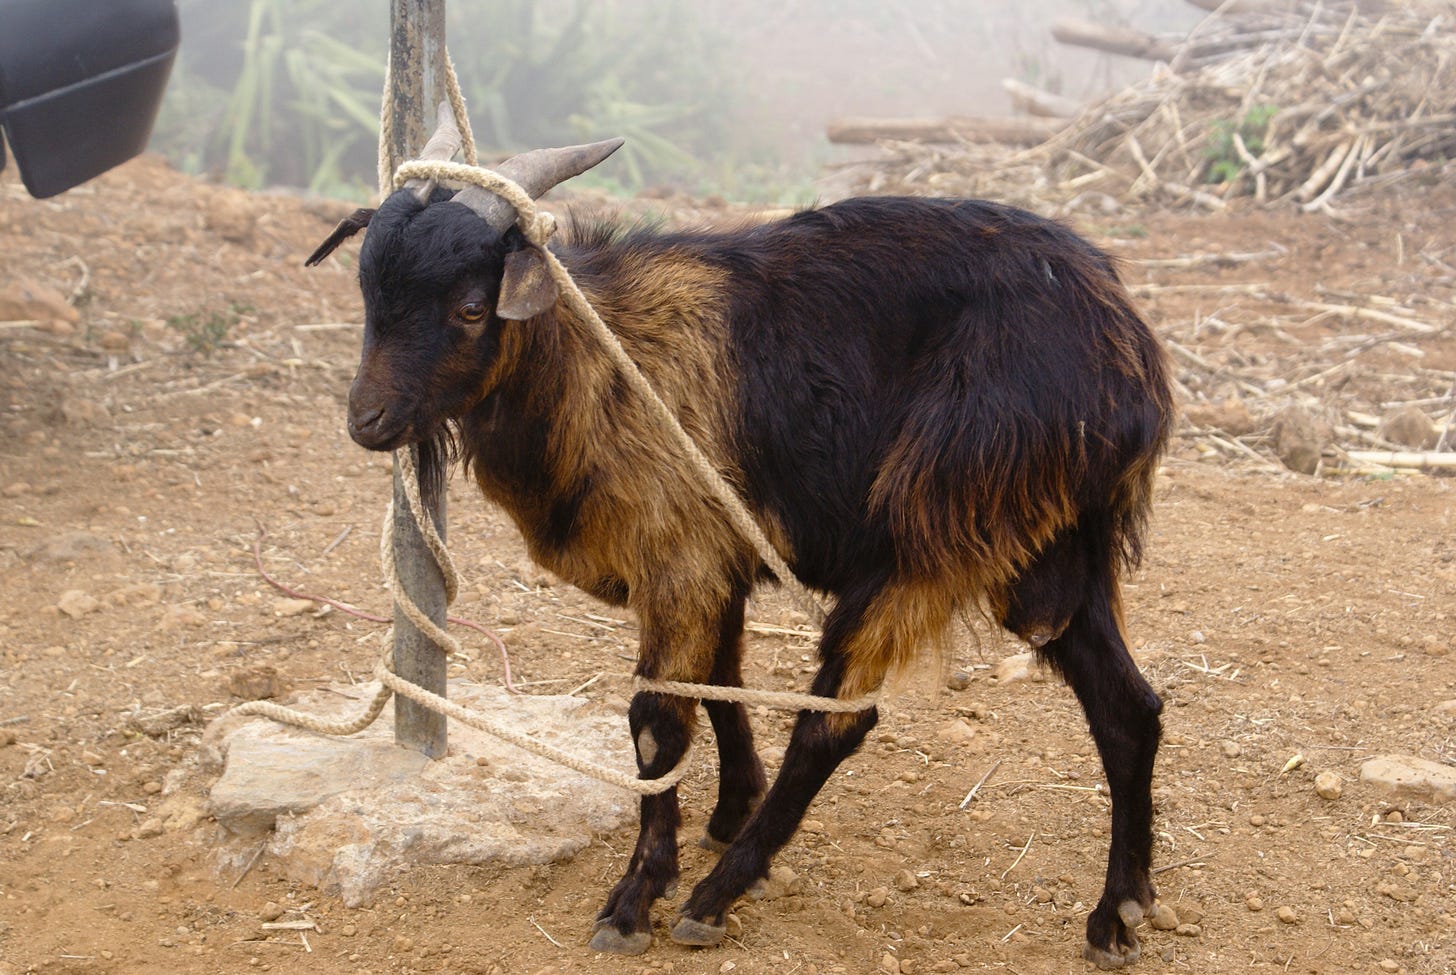 Goat tangled in a rope tied to a pole. He looks bemused, as goats often do.